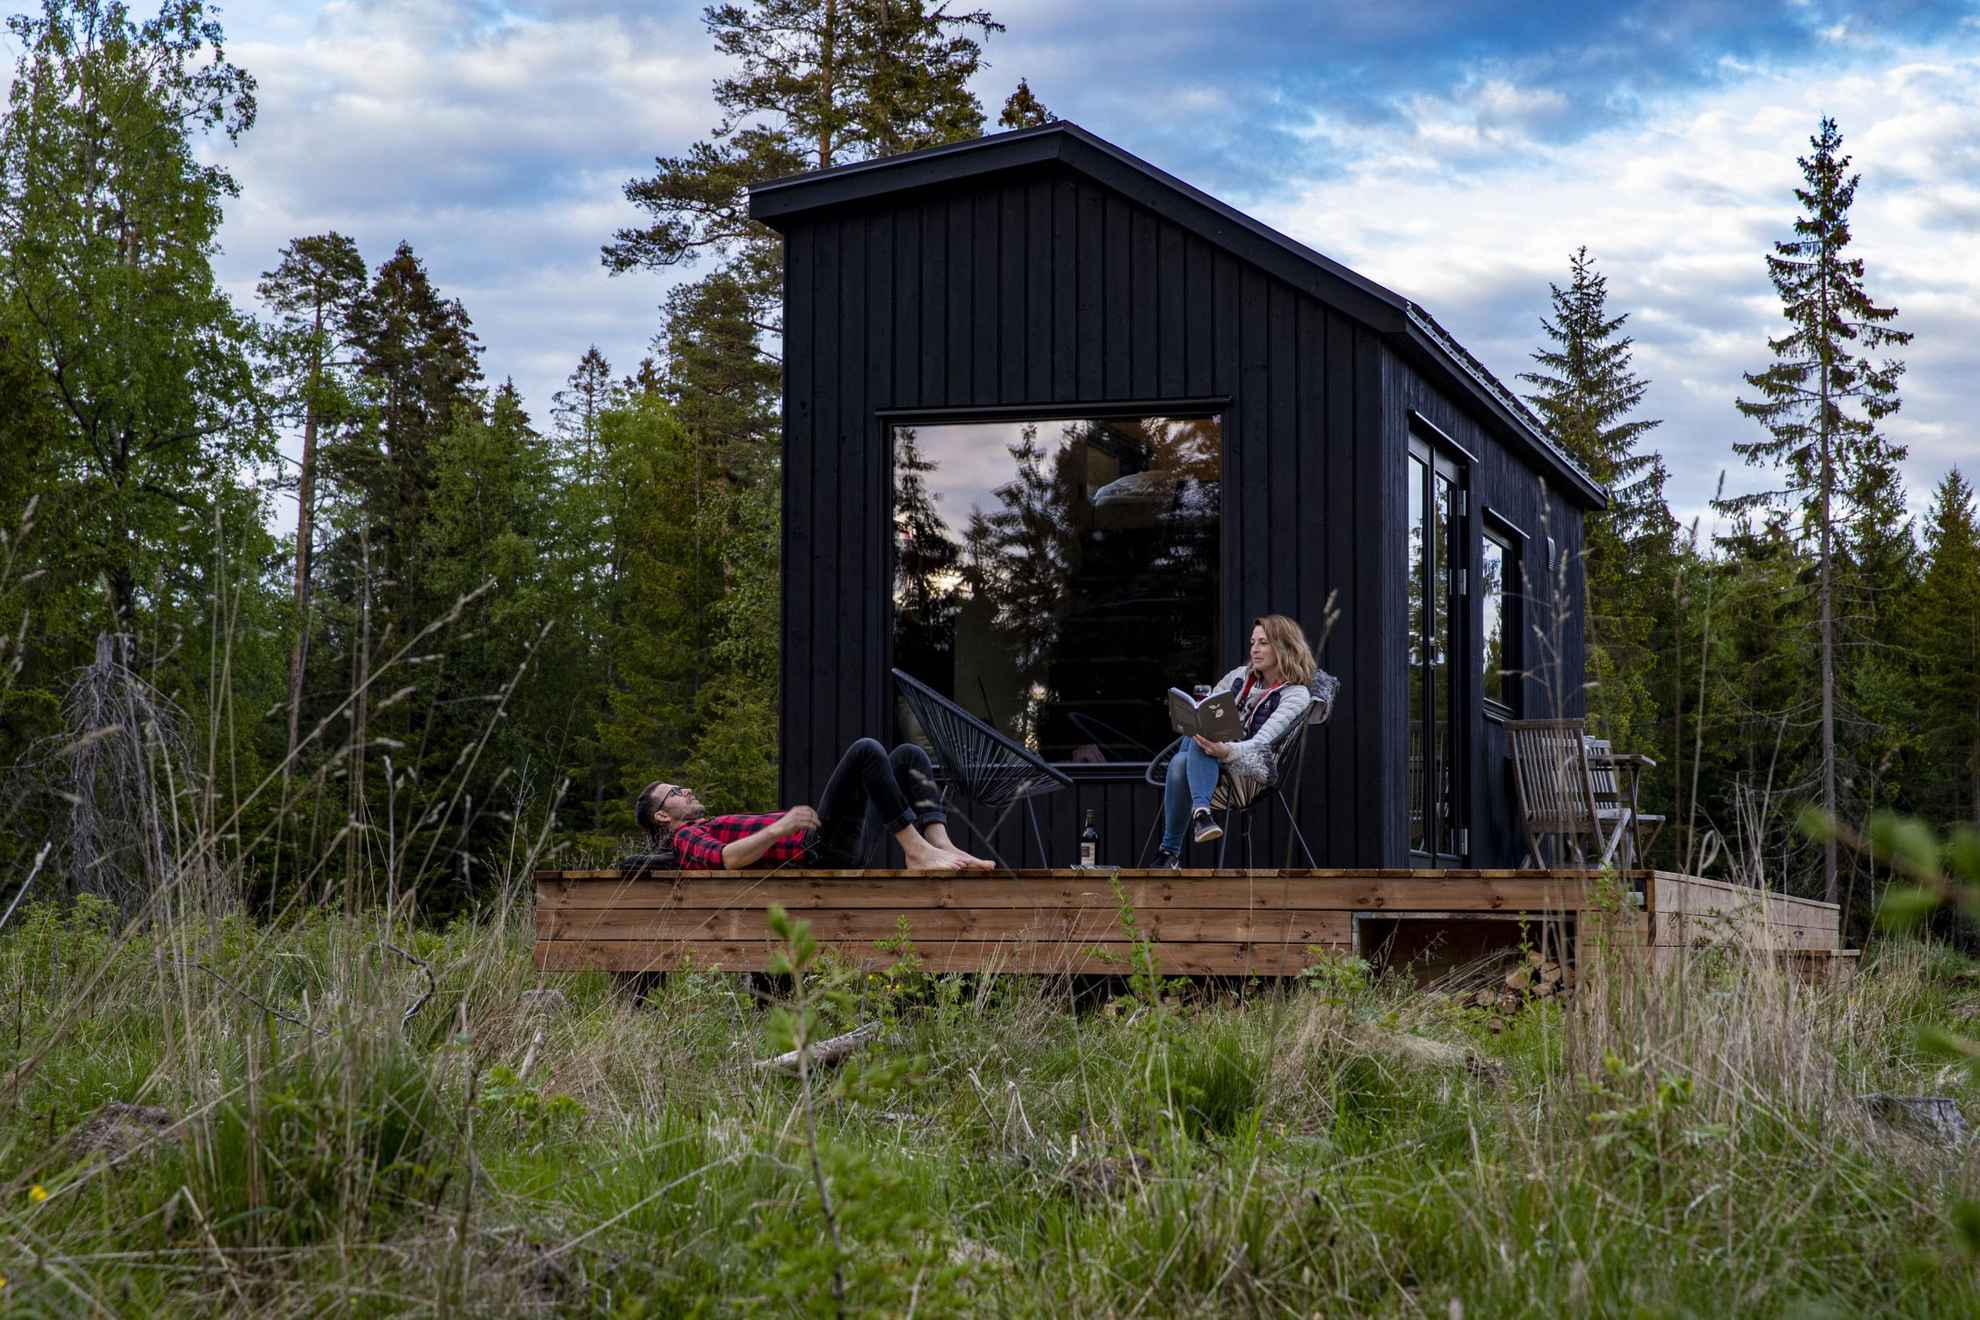 Two people are enjoying the sun while sitting on a patio in front of a cabin during summer.